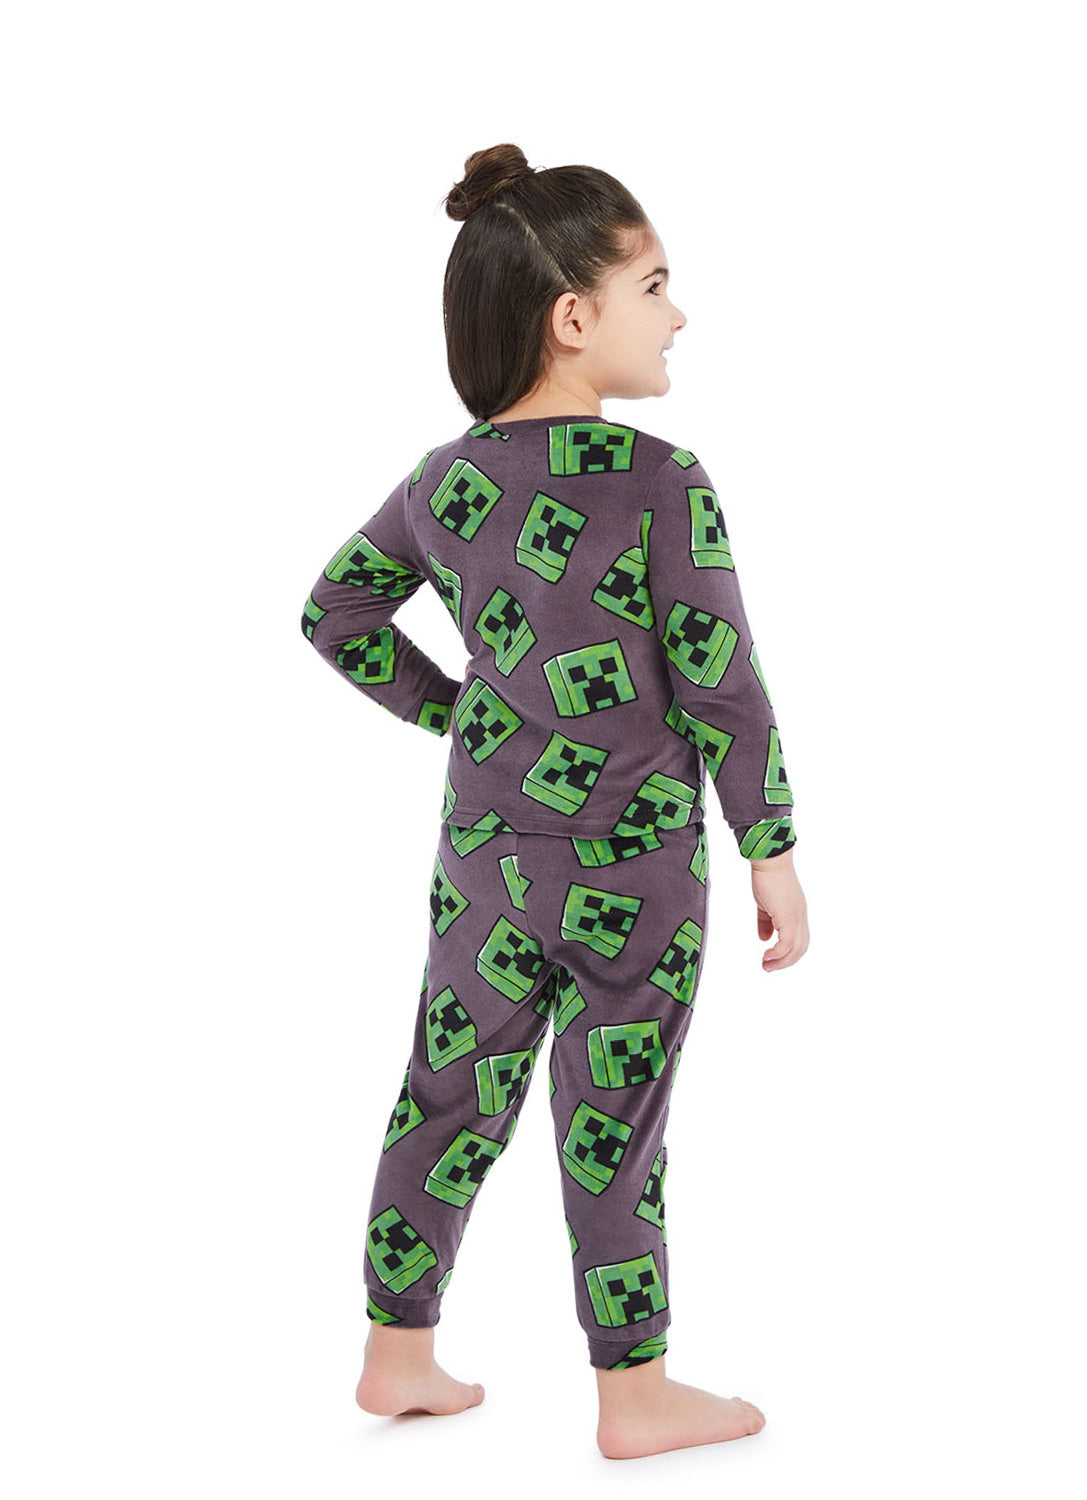 Back view Little Girl wearing Minecraft PJ set 2 pieces, long sleeve shirt and pants (gray & green)